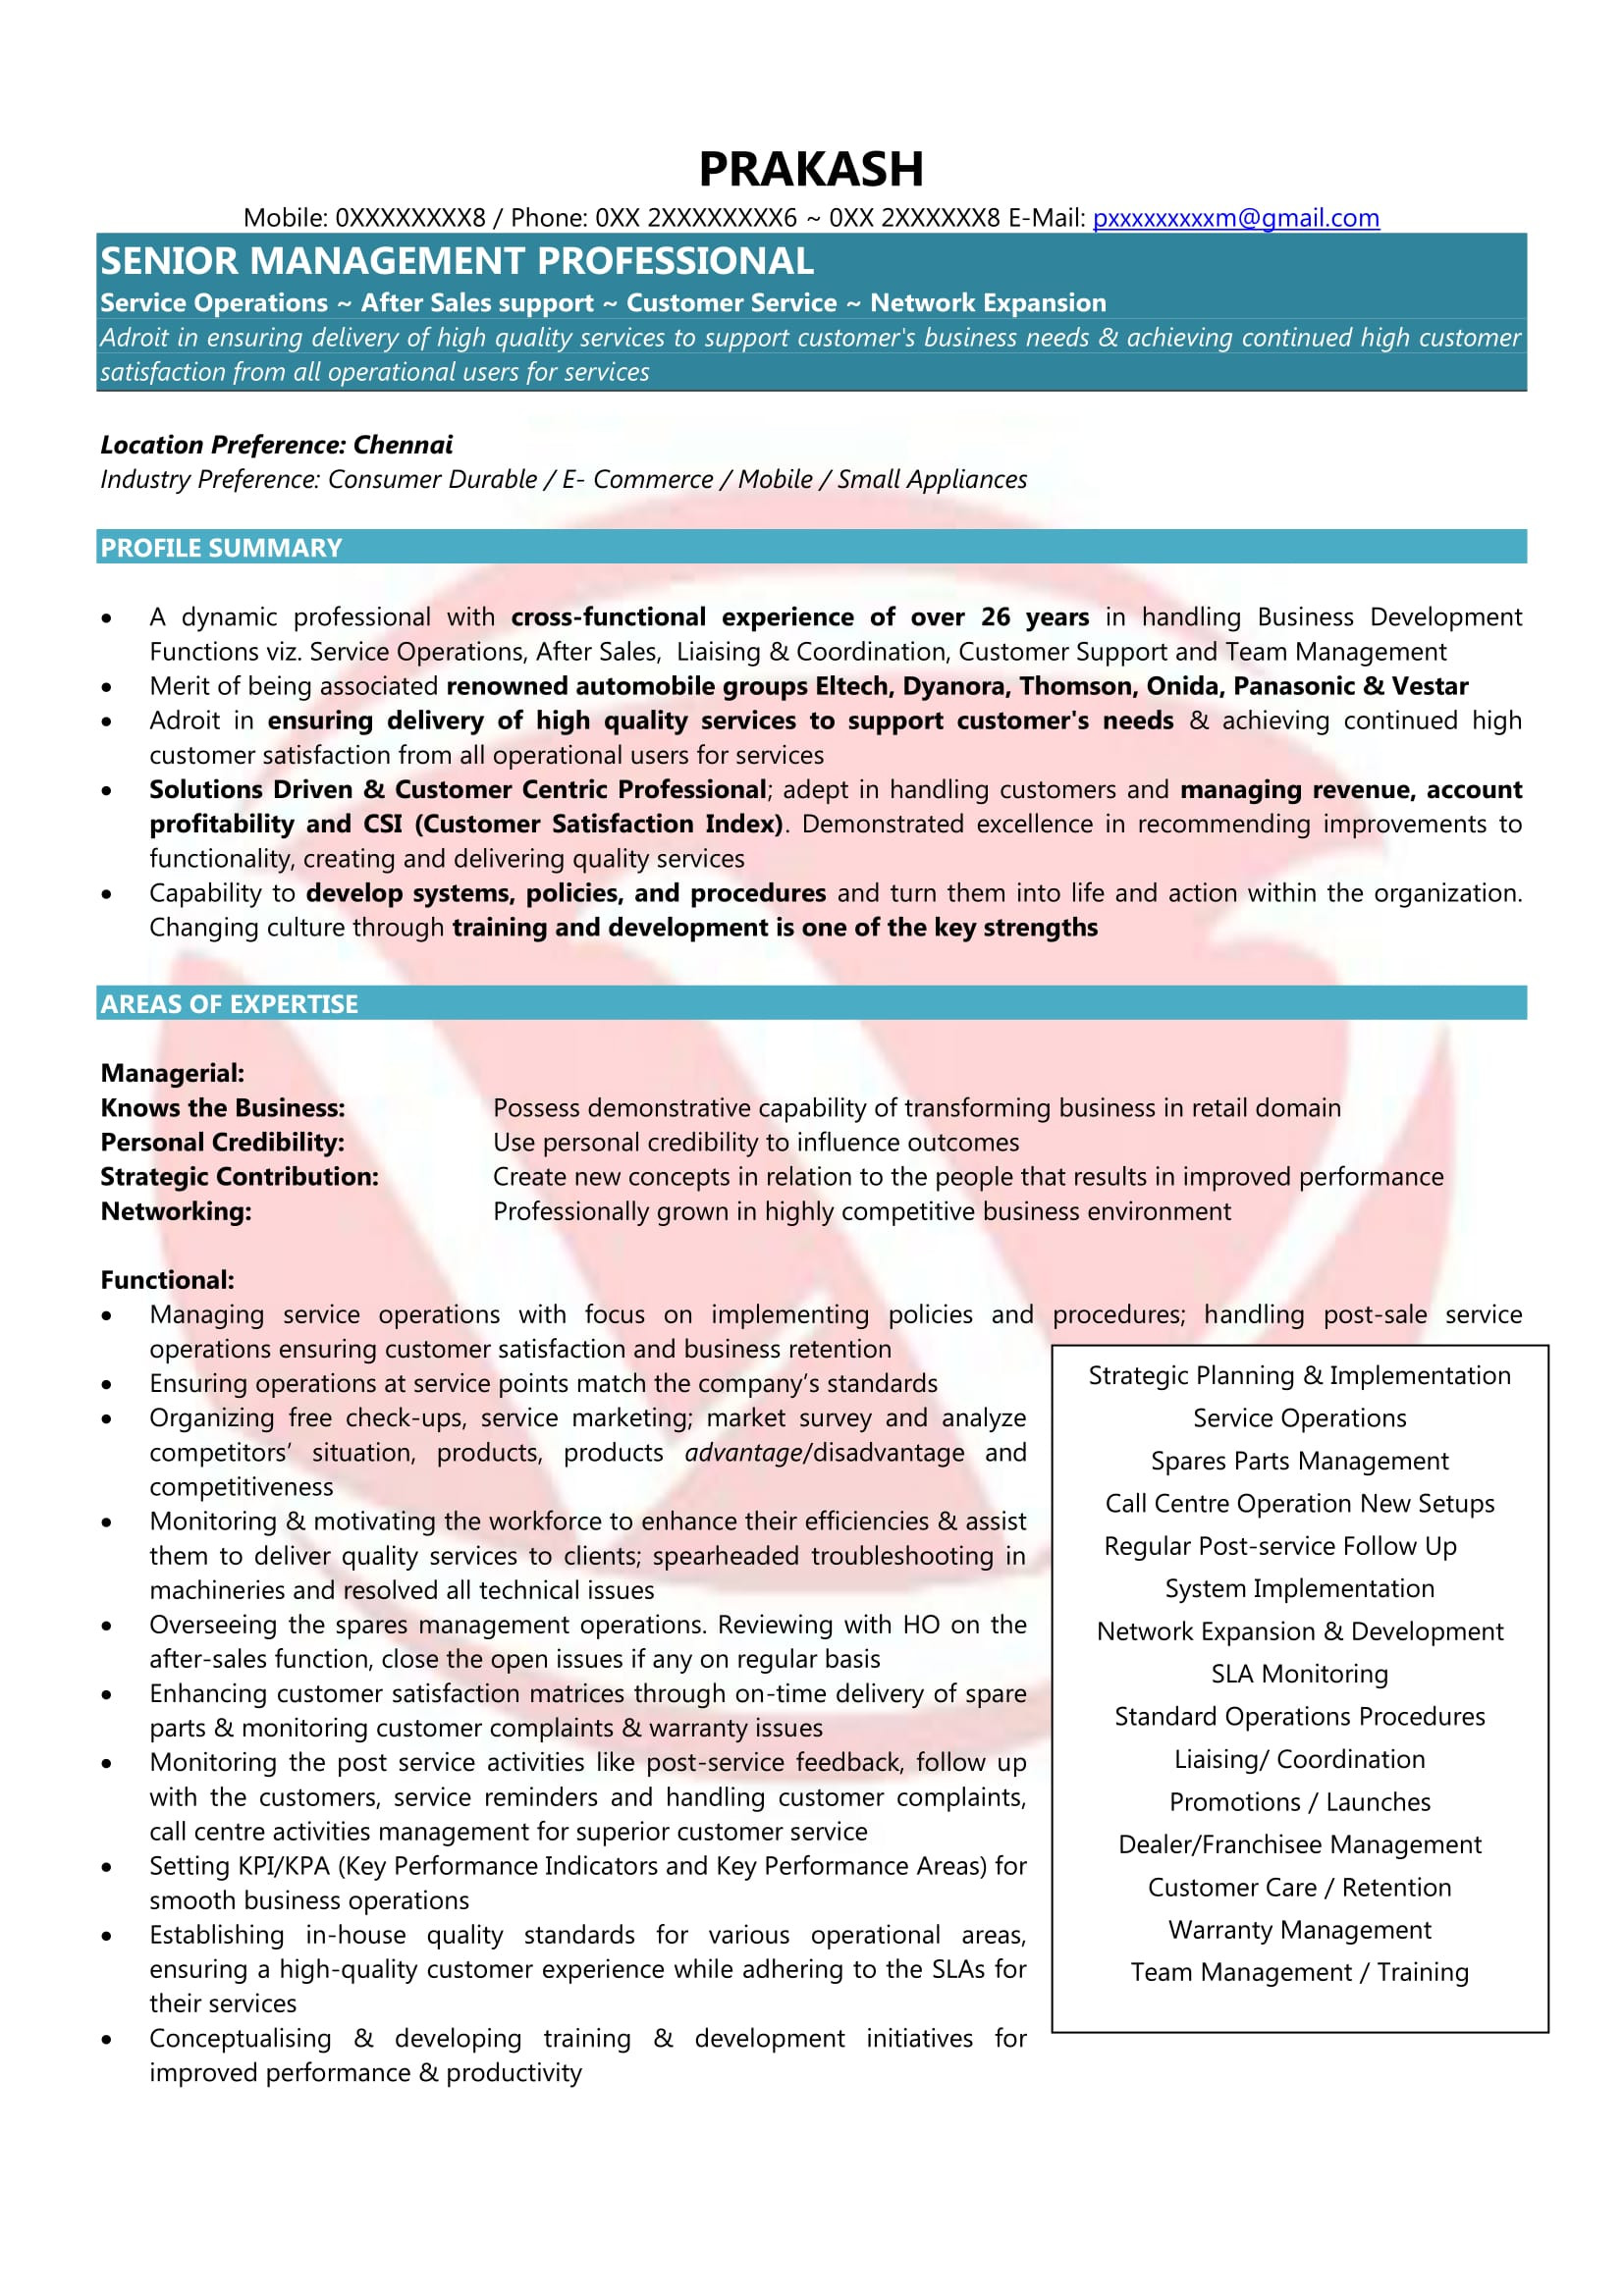 Sample Resume Of Customer Care Executive Customer Support Sample Resumes, Download Resume format Templates!